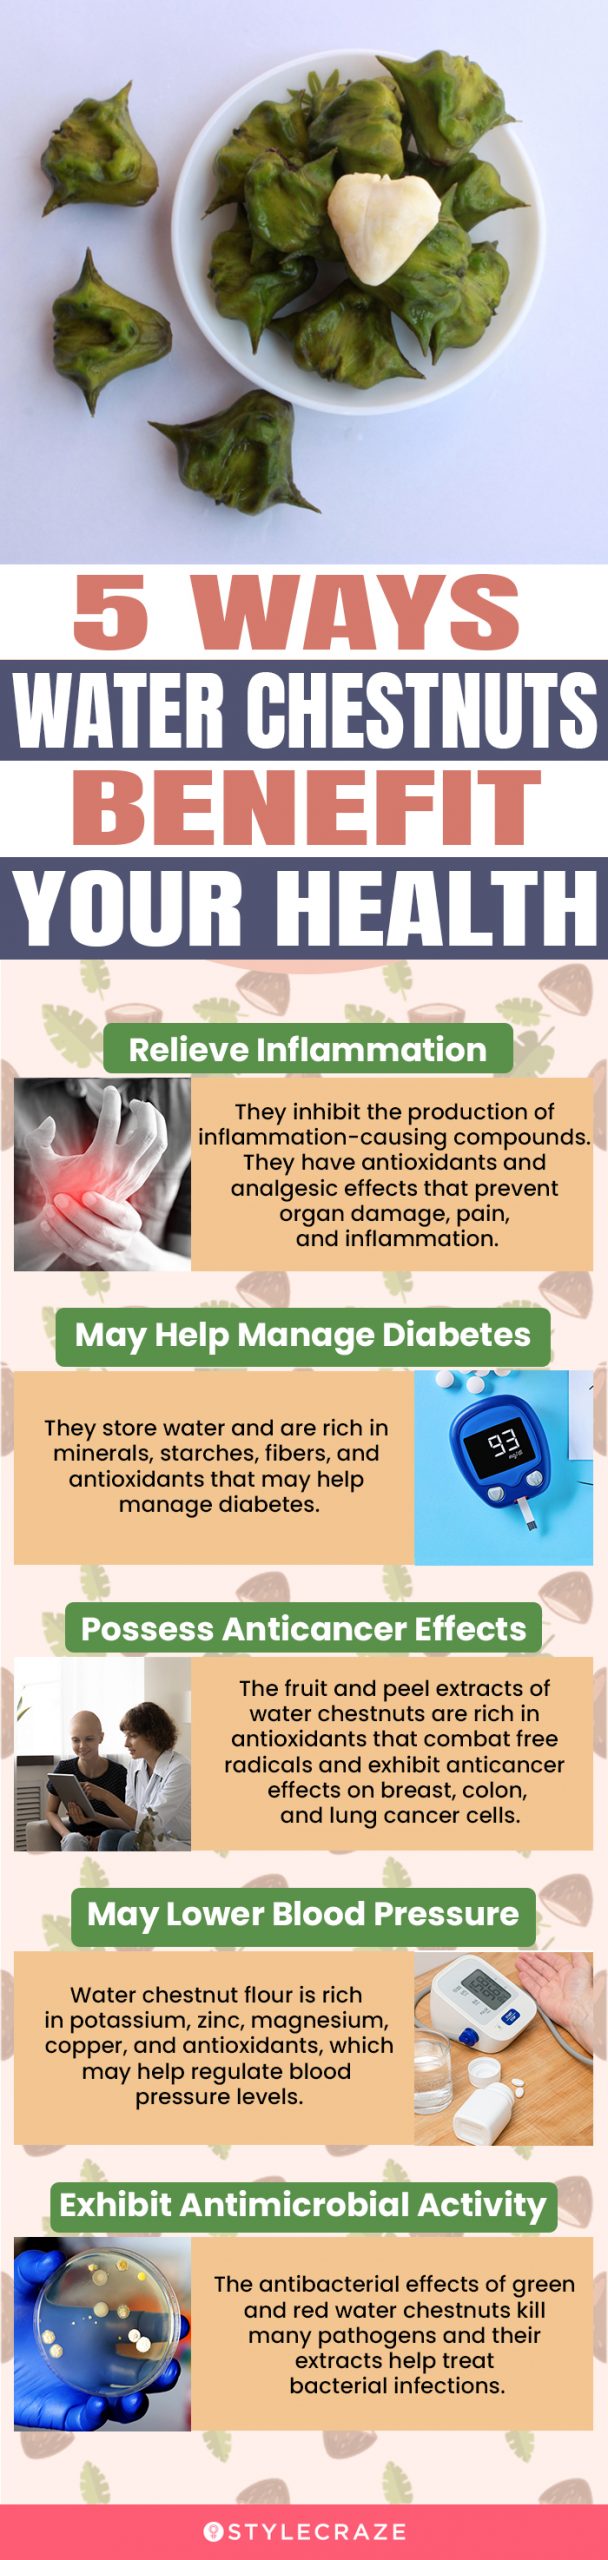 5 ways water chestnuts benefit your health (infographic)